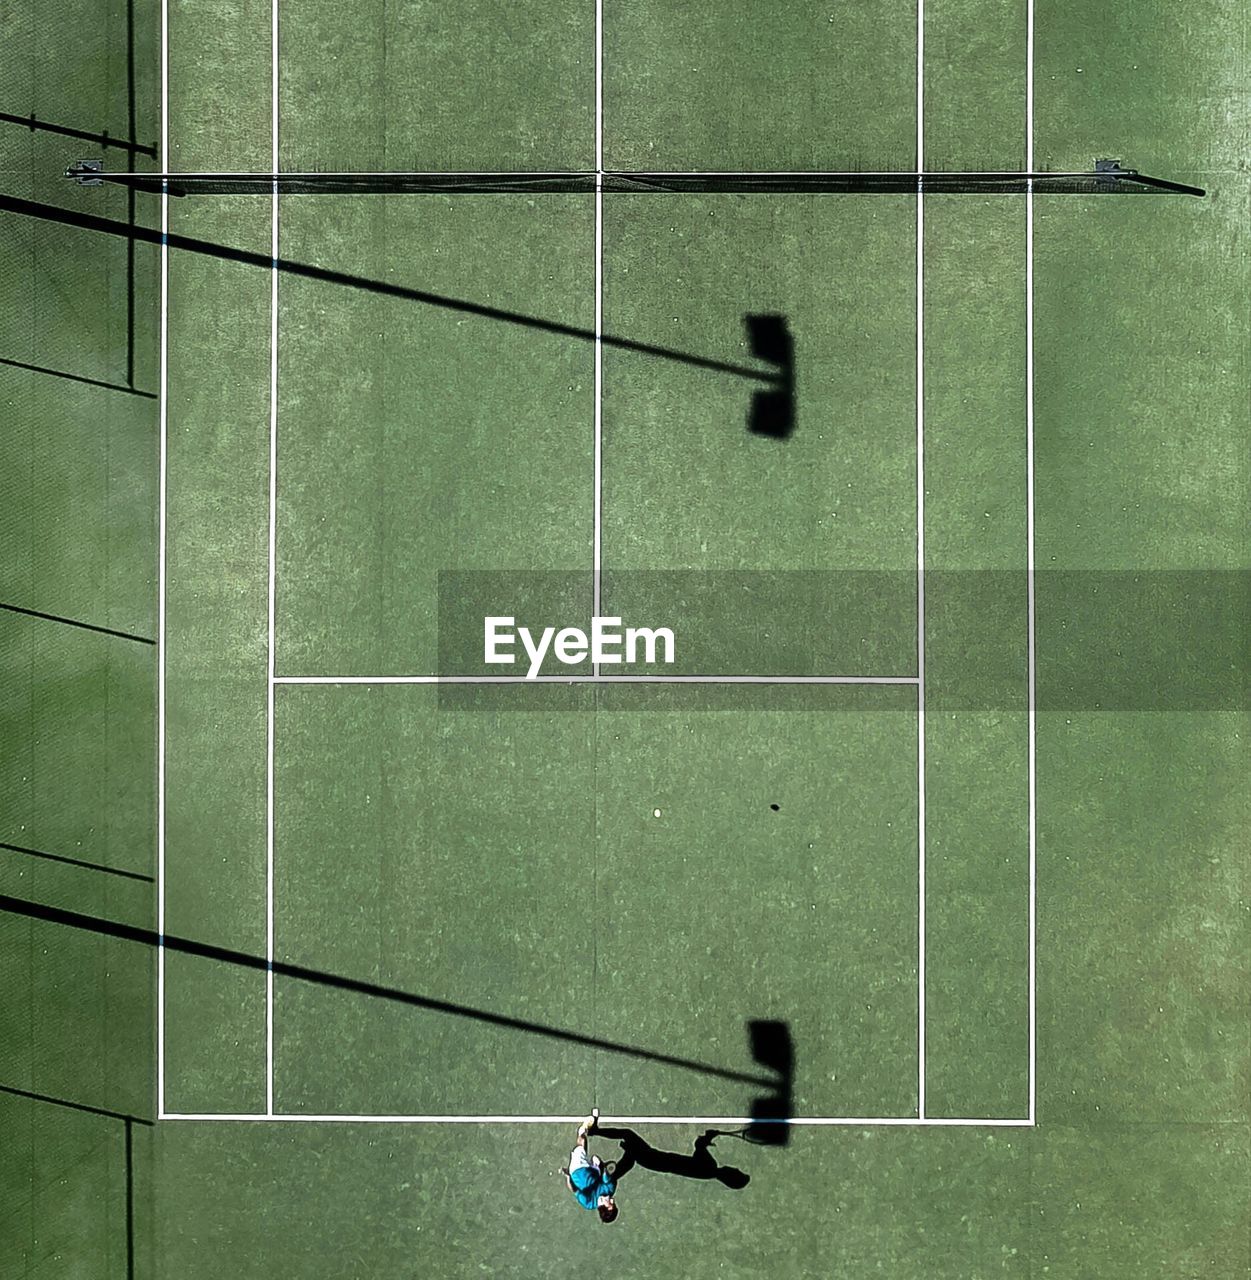 Directly above shot of athlete playing at tennis court